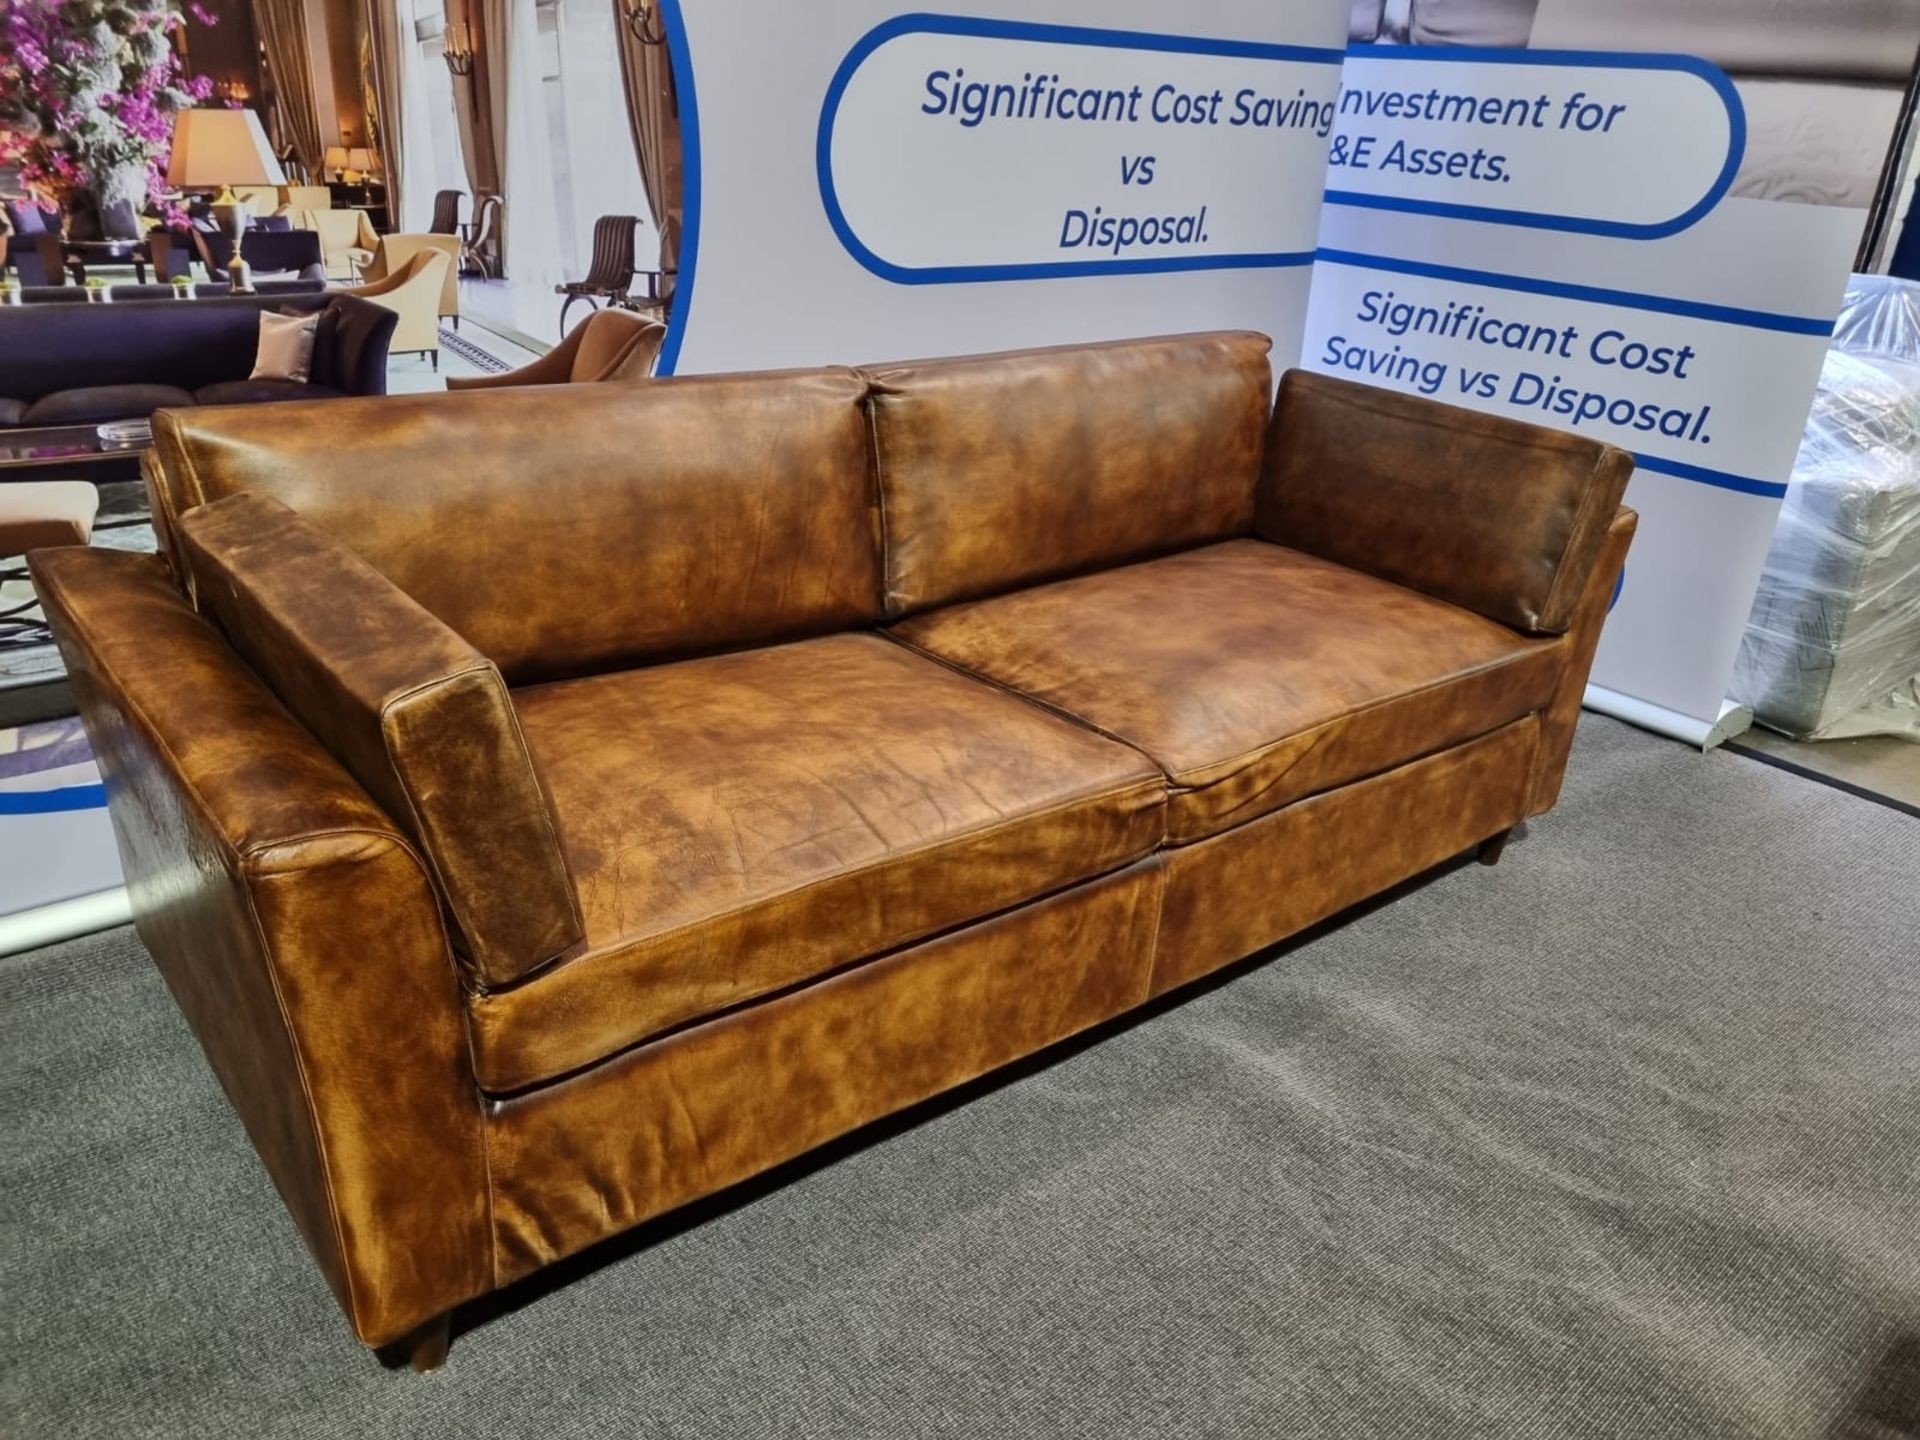 *** Brand New *** Colorado Leather Sofa In Antique Whisky Top Grain Leather Packed With - Image 4 of 5